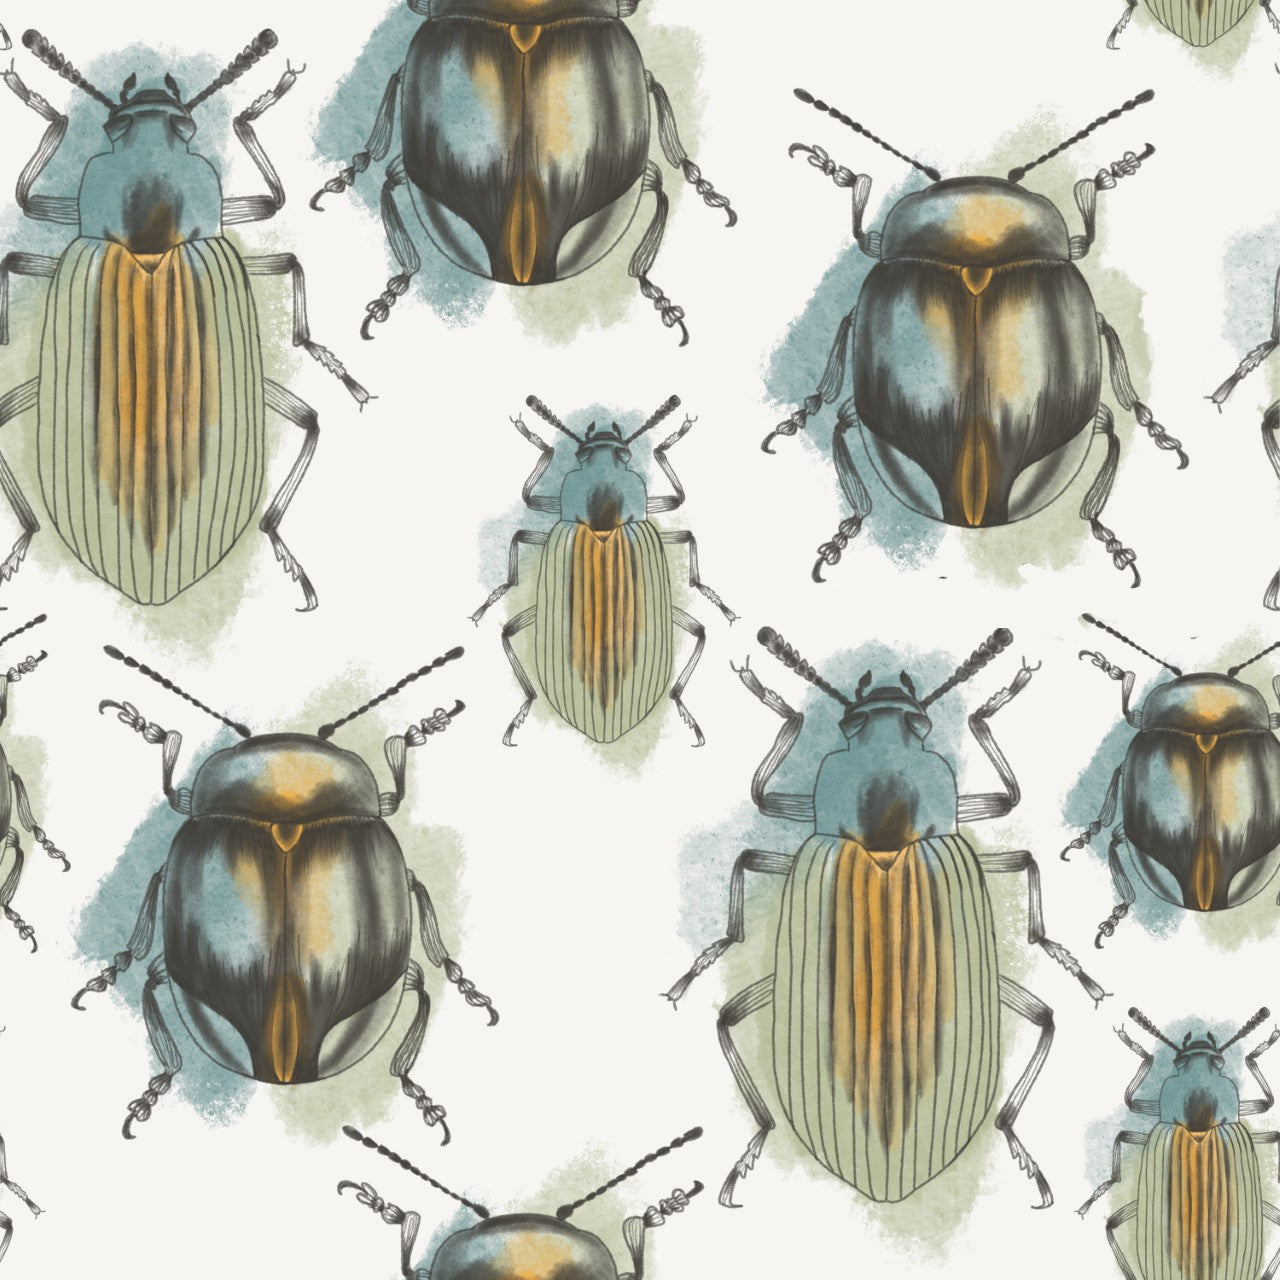 Green, blue, orange and black cute bugs and beetles on white background easy to install and remove peel and stick custom wallpaper available in different lengths/sizes locally created and printed in Canada. Removable, washable, durable, commercial grade and water proof.